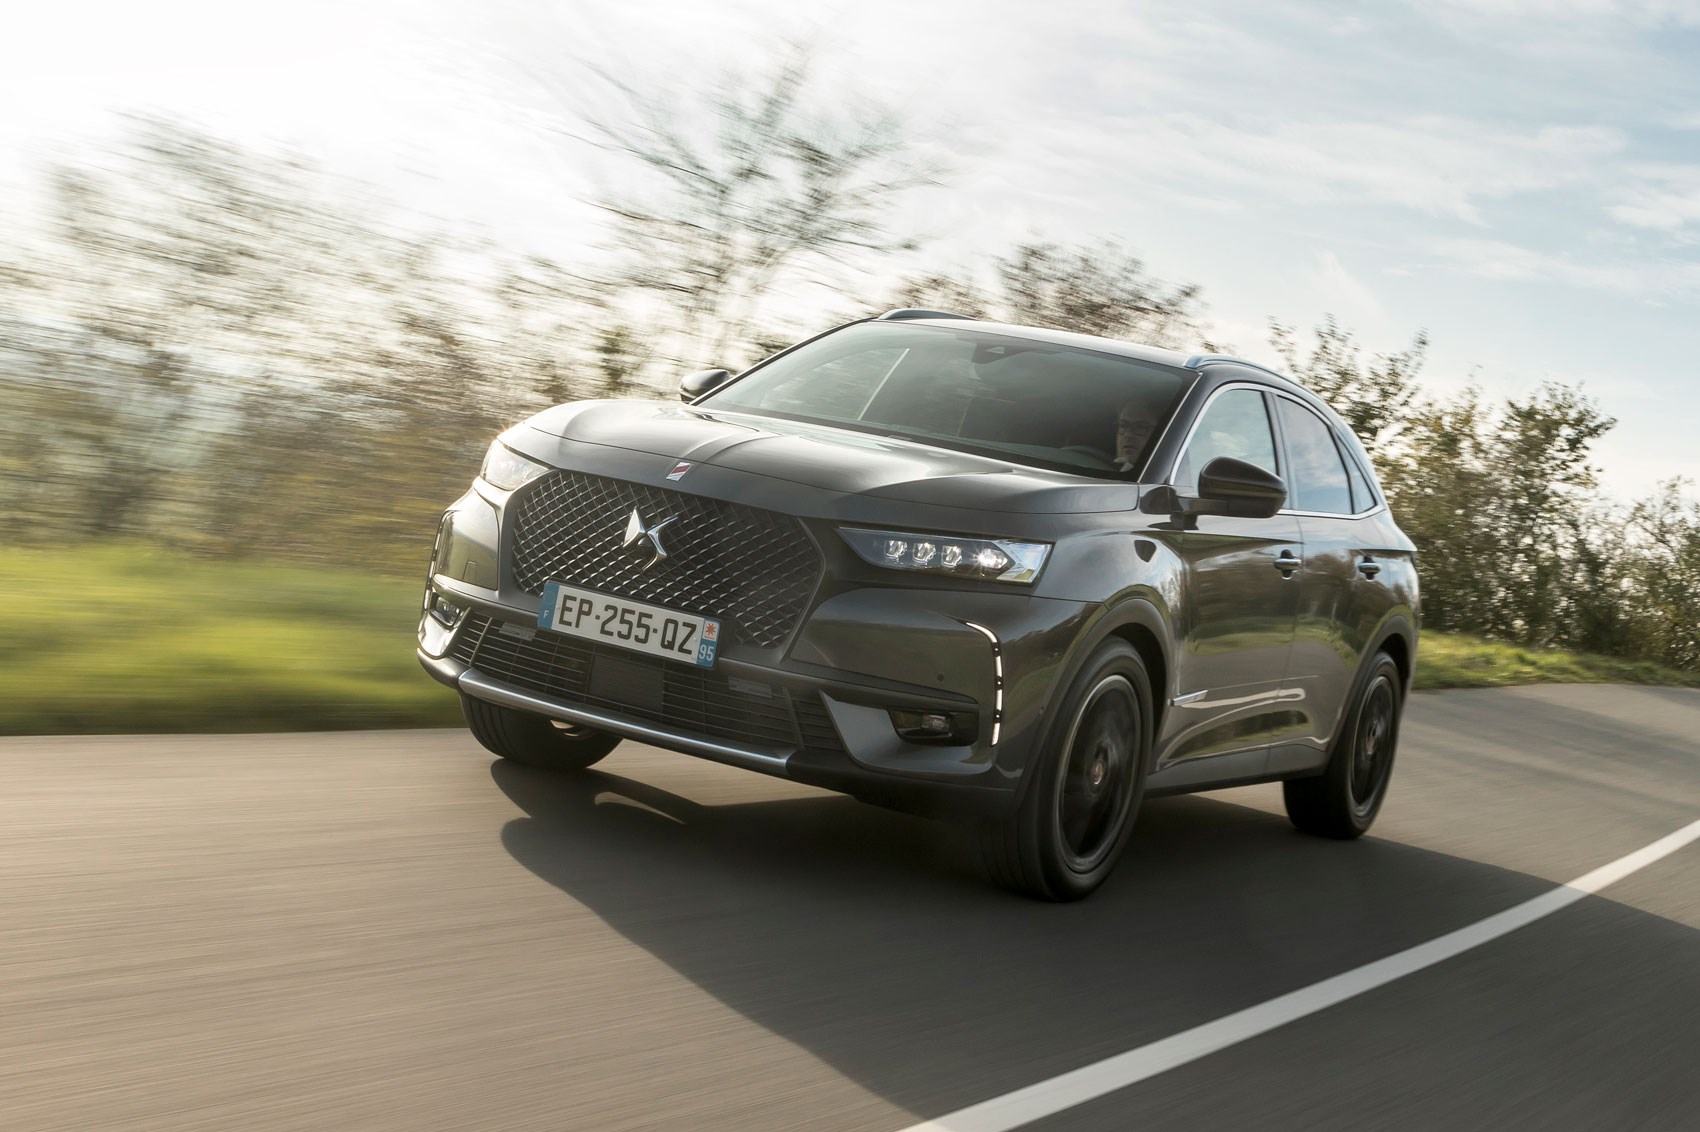 DS7 Crossback diesel review by CAR magazine